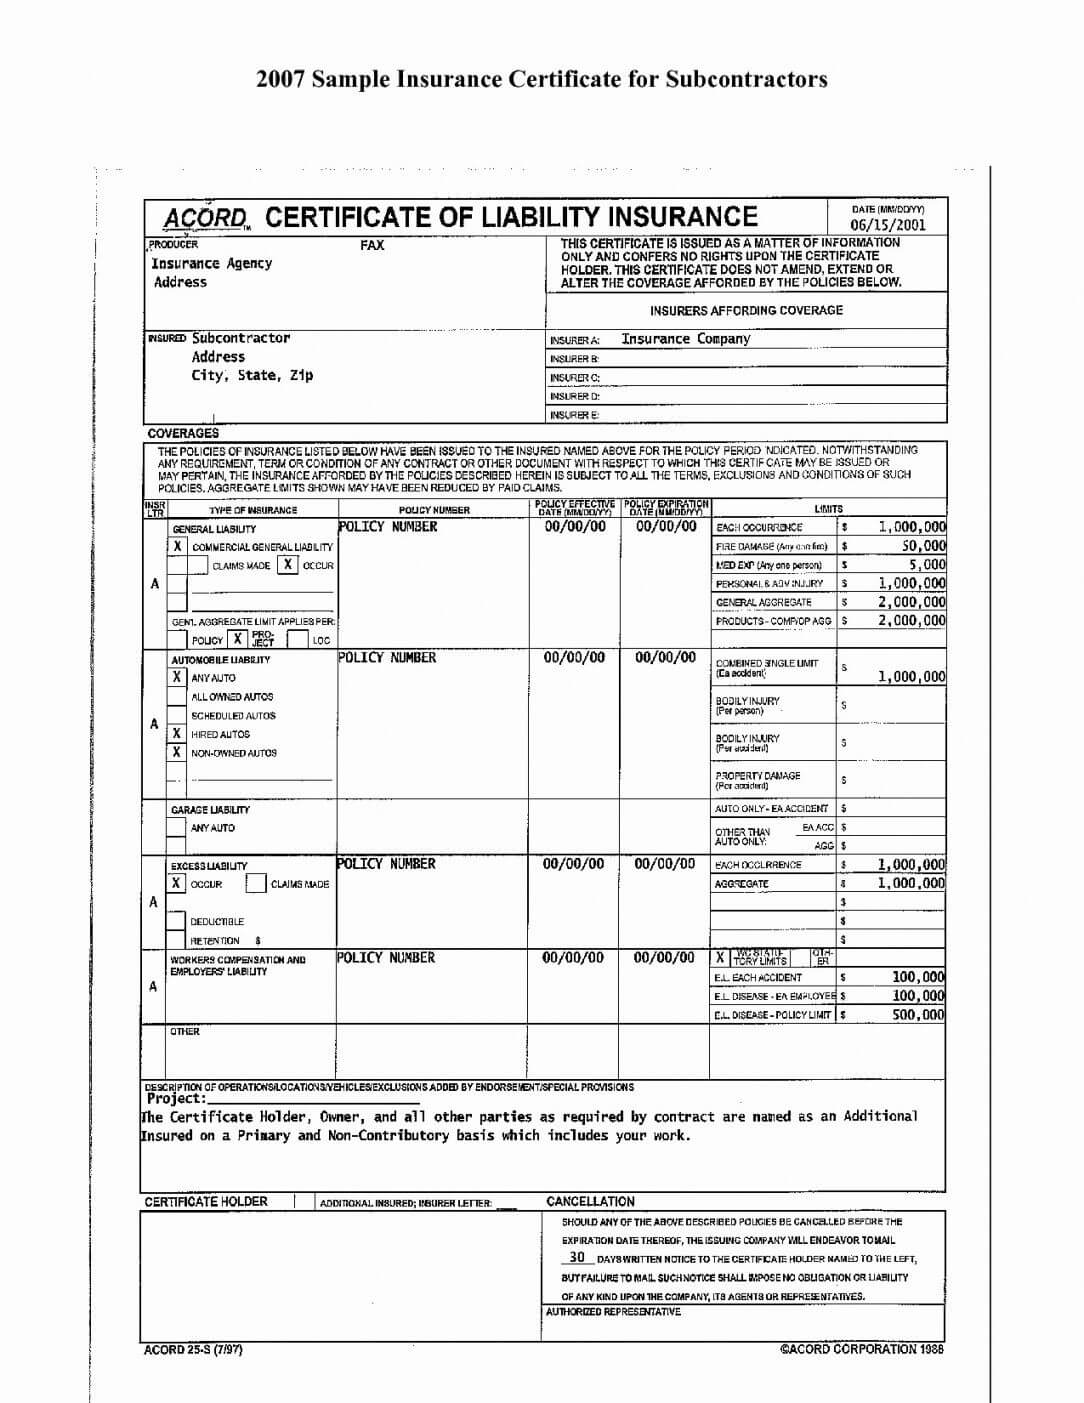 Editable Form Ificate Of Liability Insurance What Is regarding